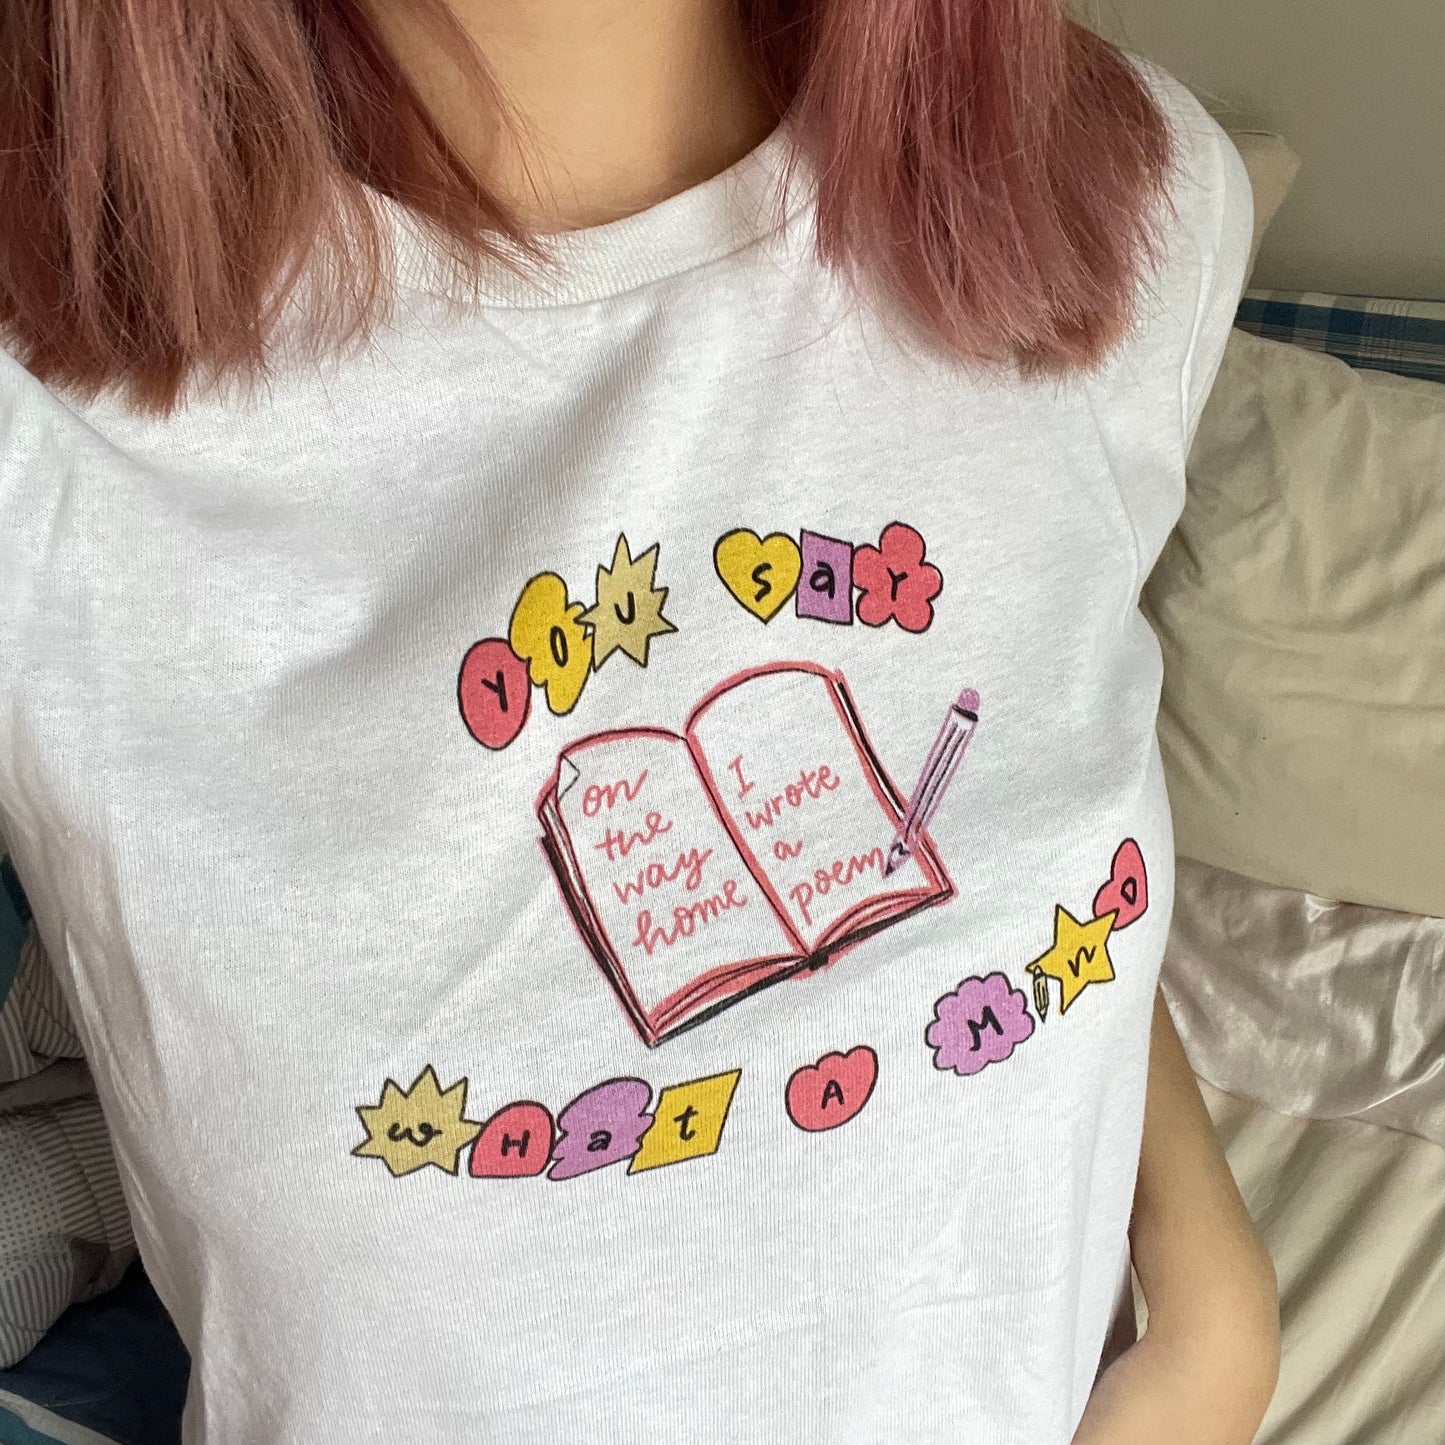 What A Mind (Sweet Nothing) baby tee